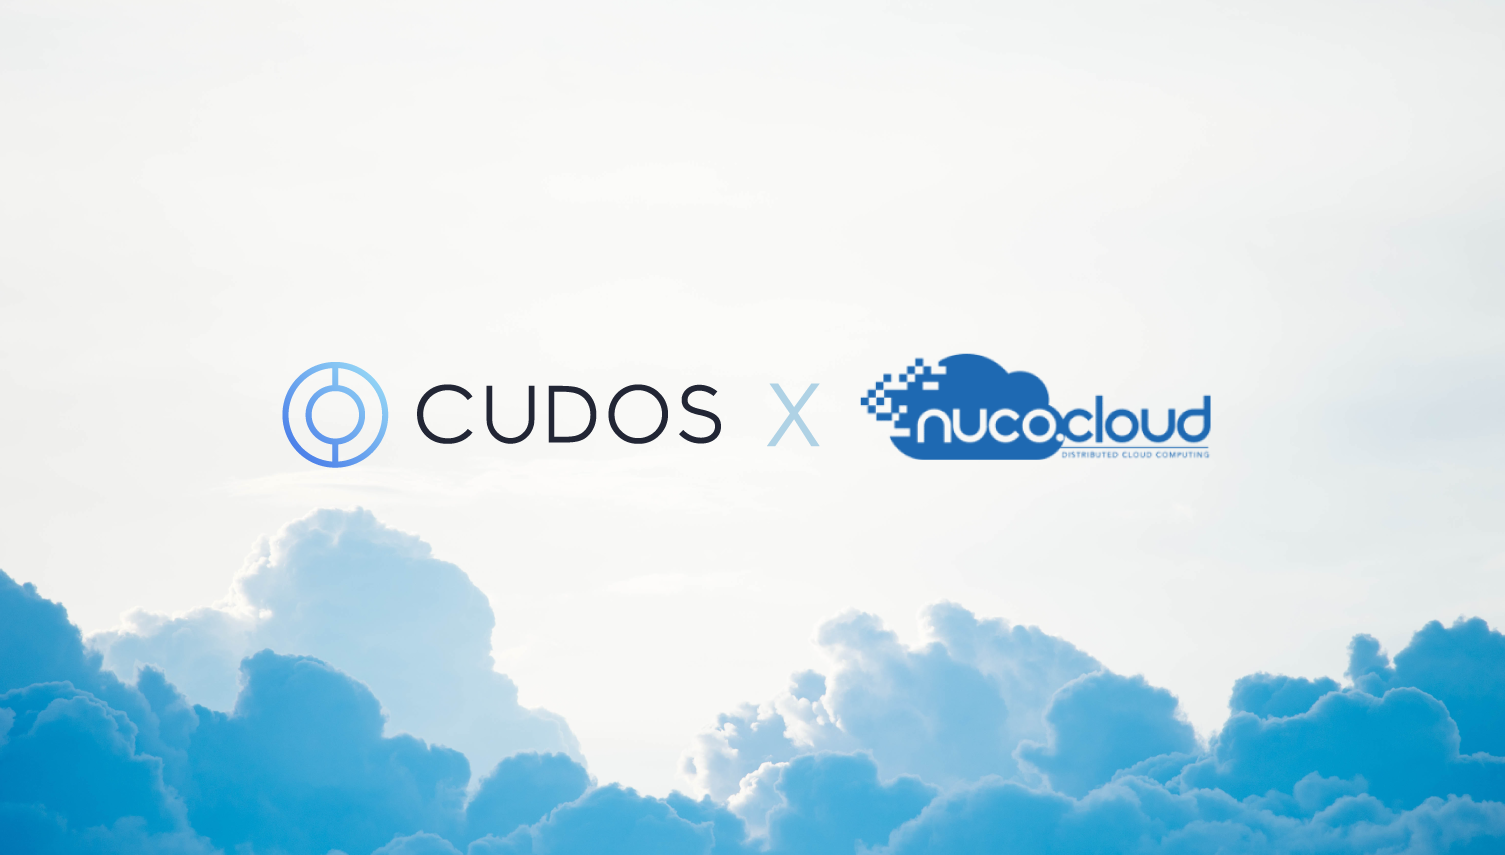 Cudos partners with nuco.cloud to reduce wasted computing